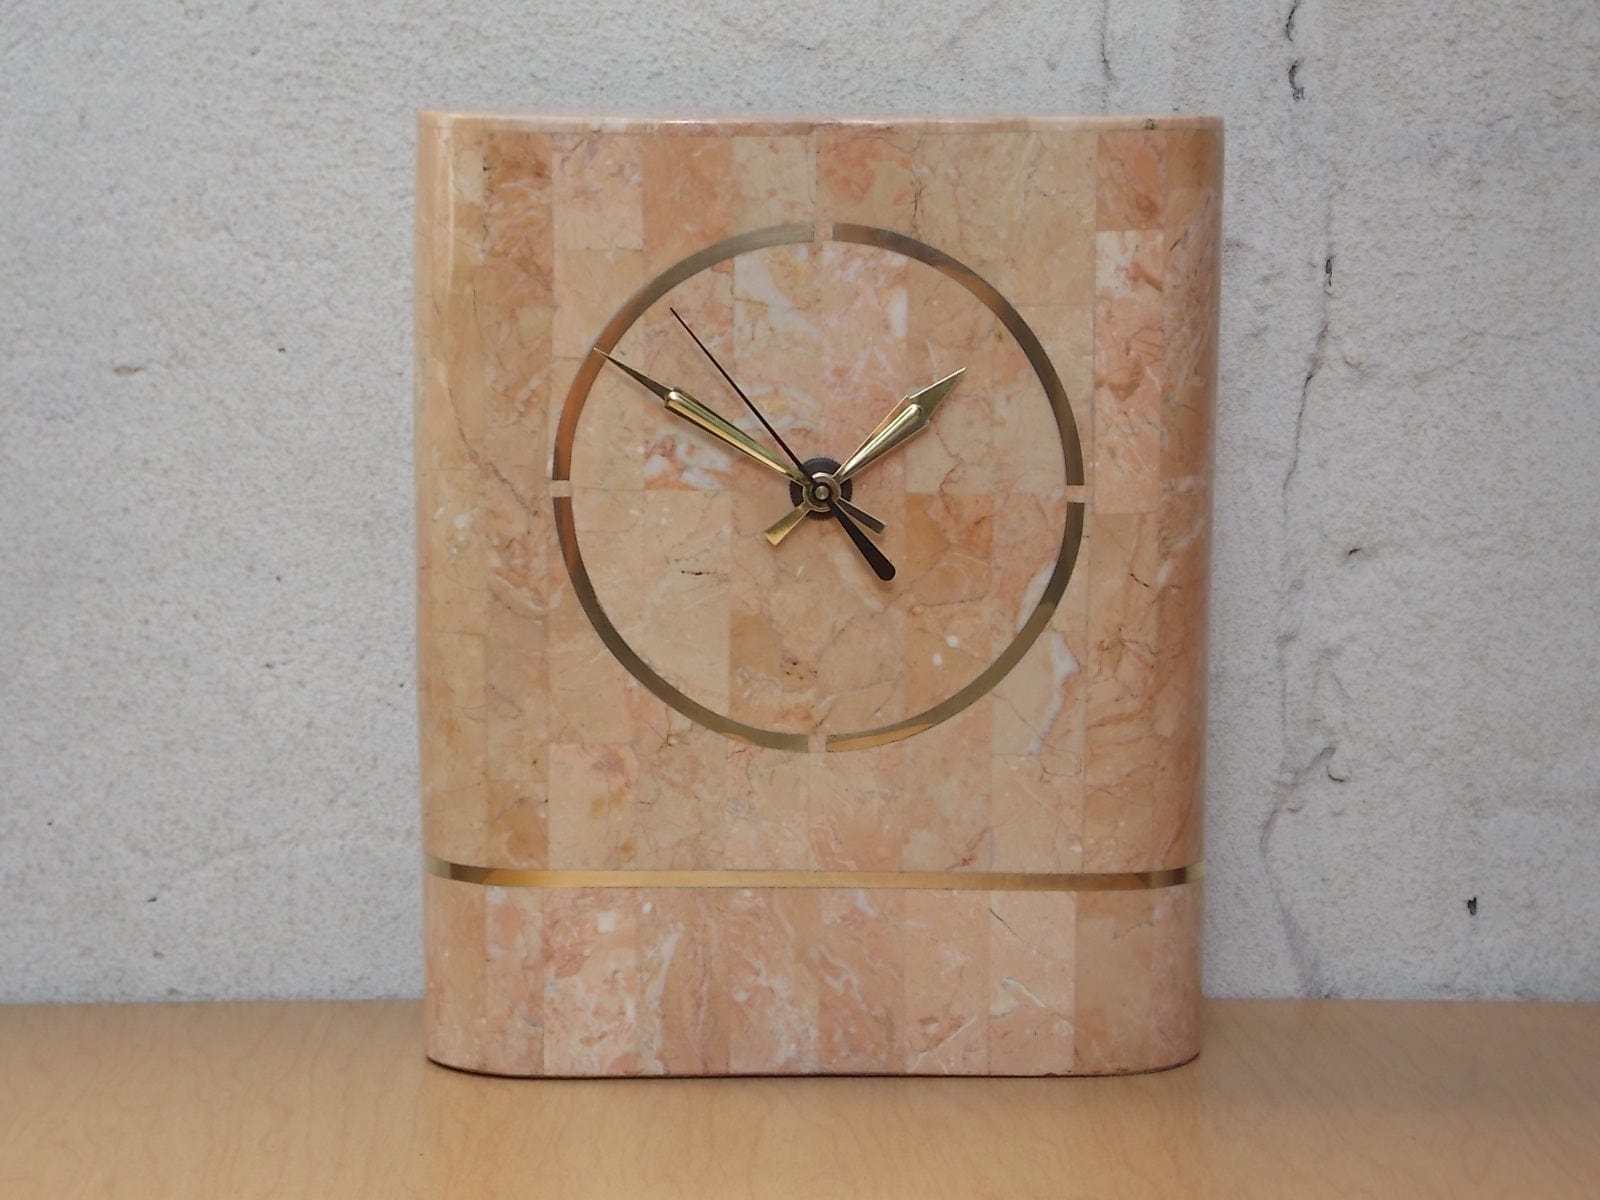 I Like Mike's Mid Century Modern Clock Heavy Pink 1980s Faux Marble Mantle Clock with Deco Details